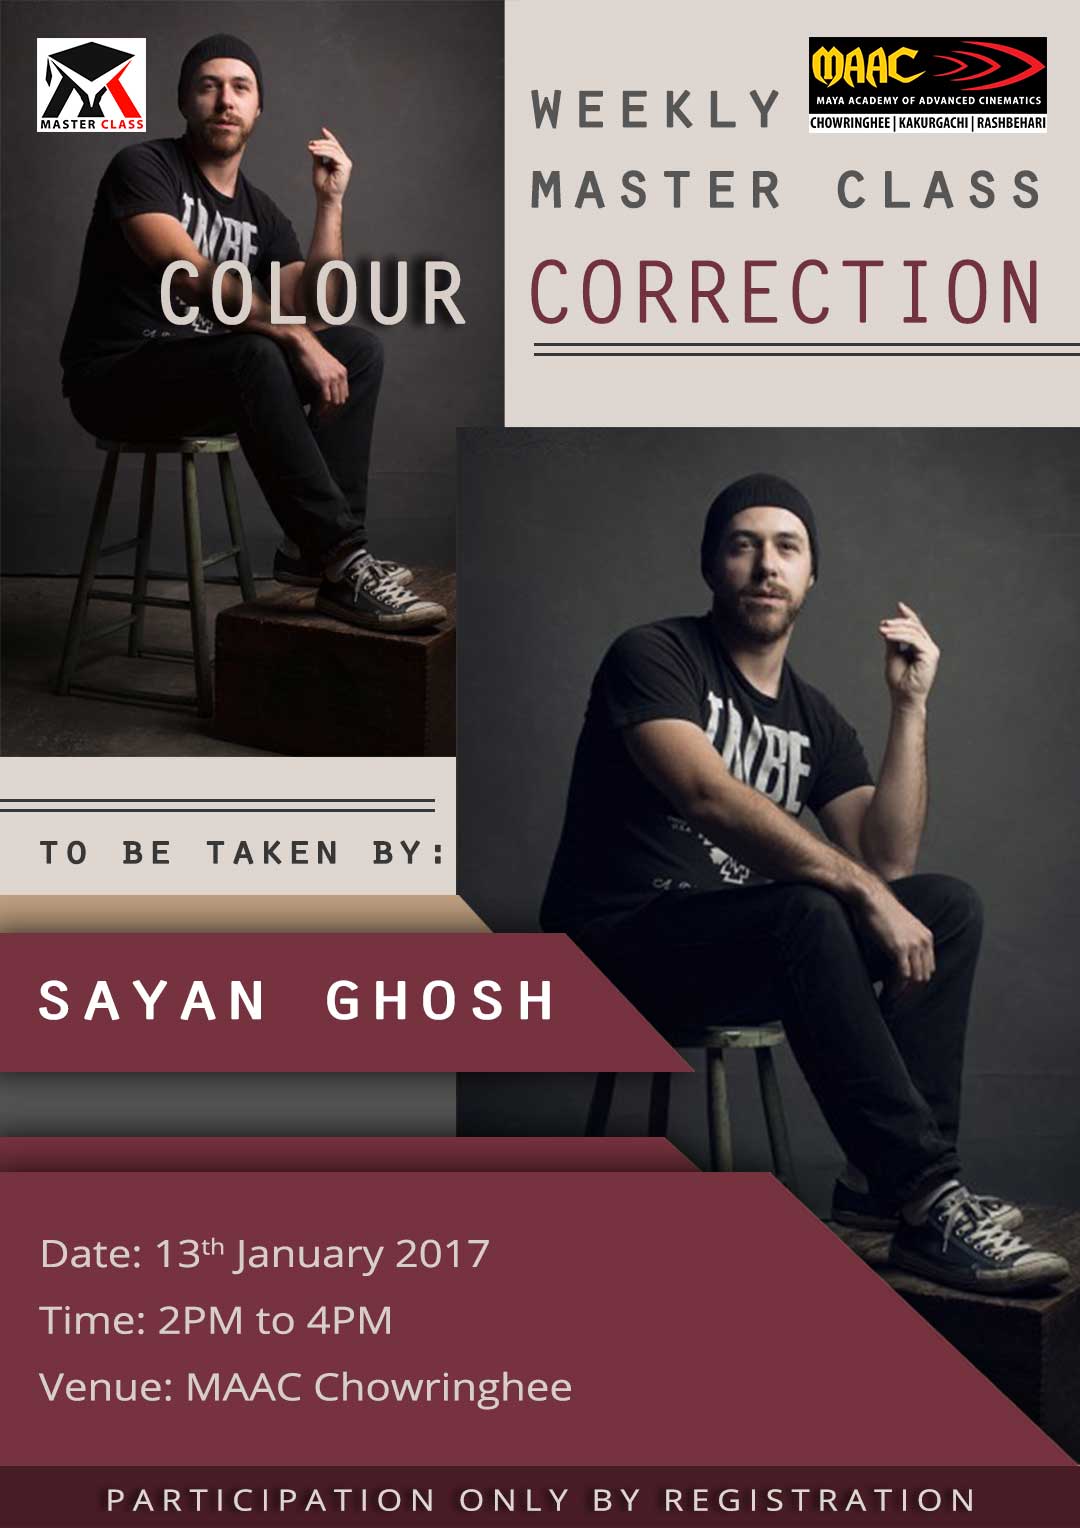 Weekly Master Class on Colour Correction - Sayan Ghosh